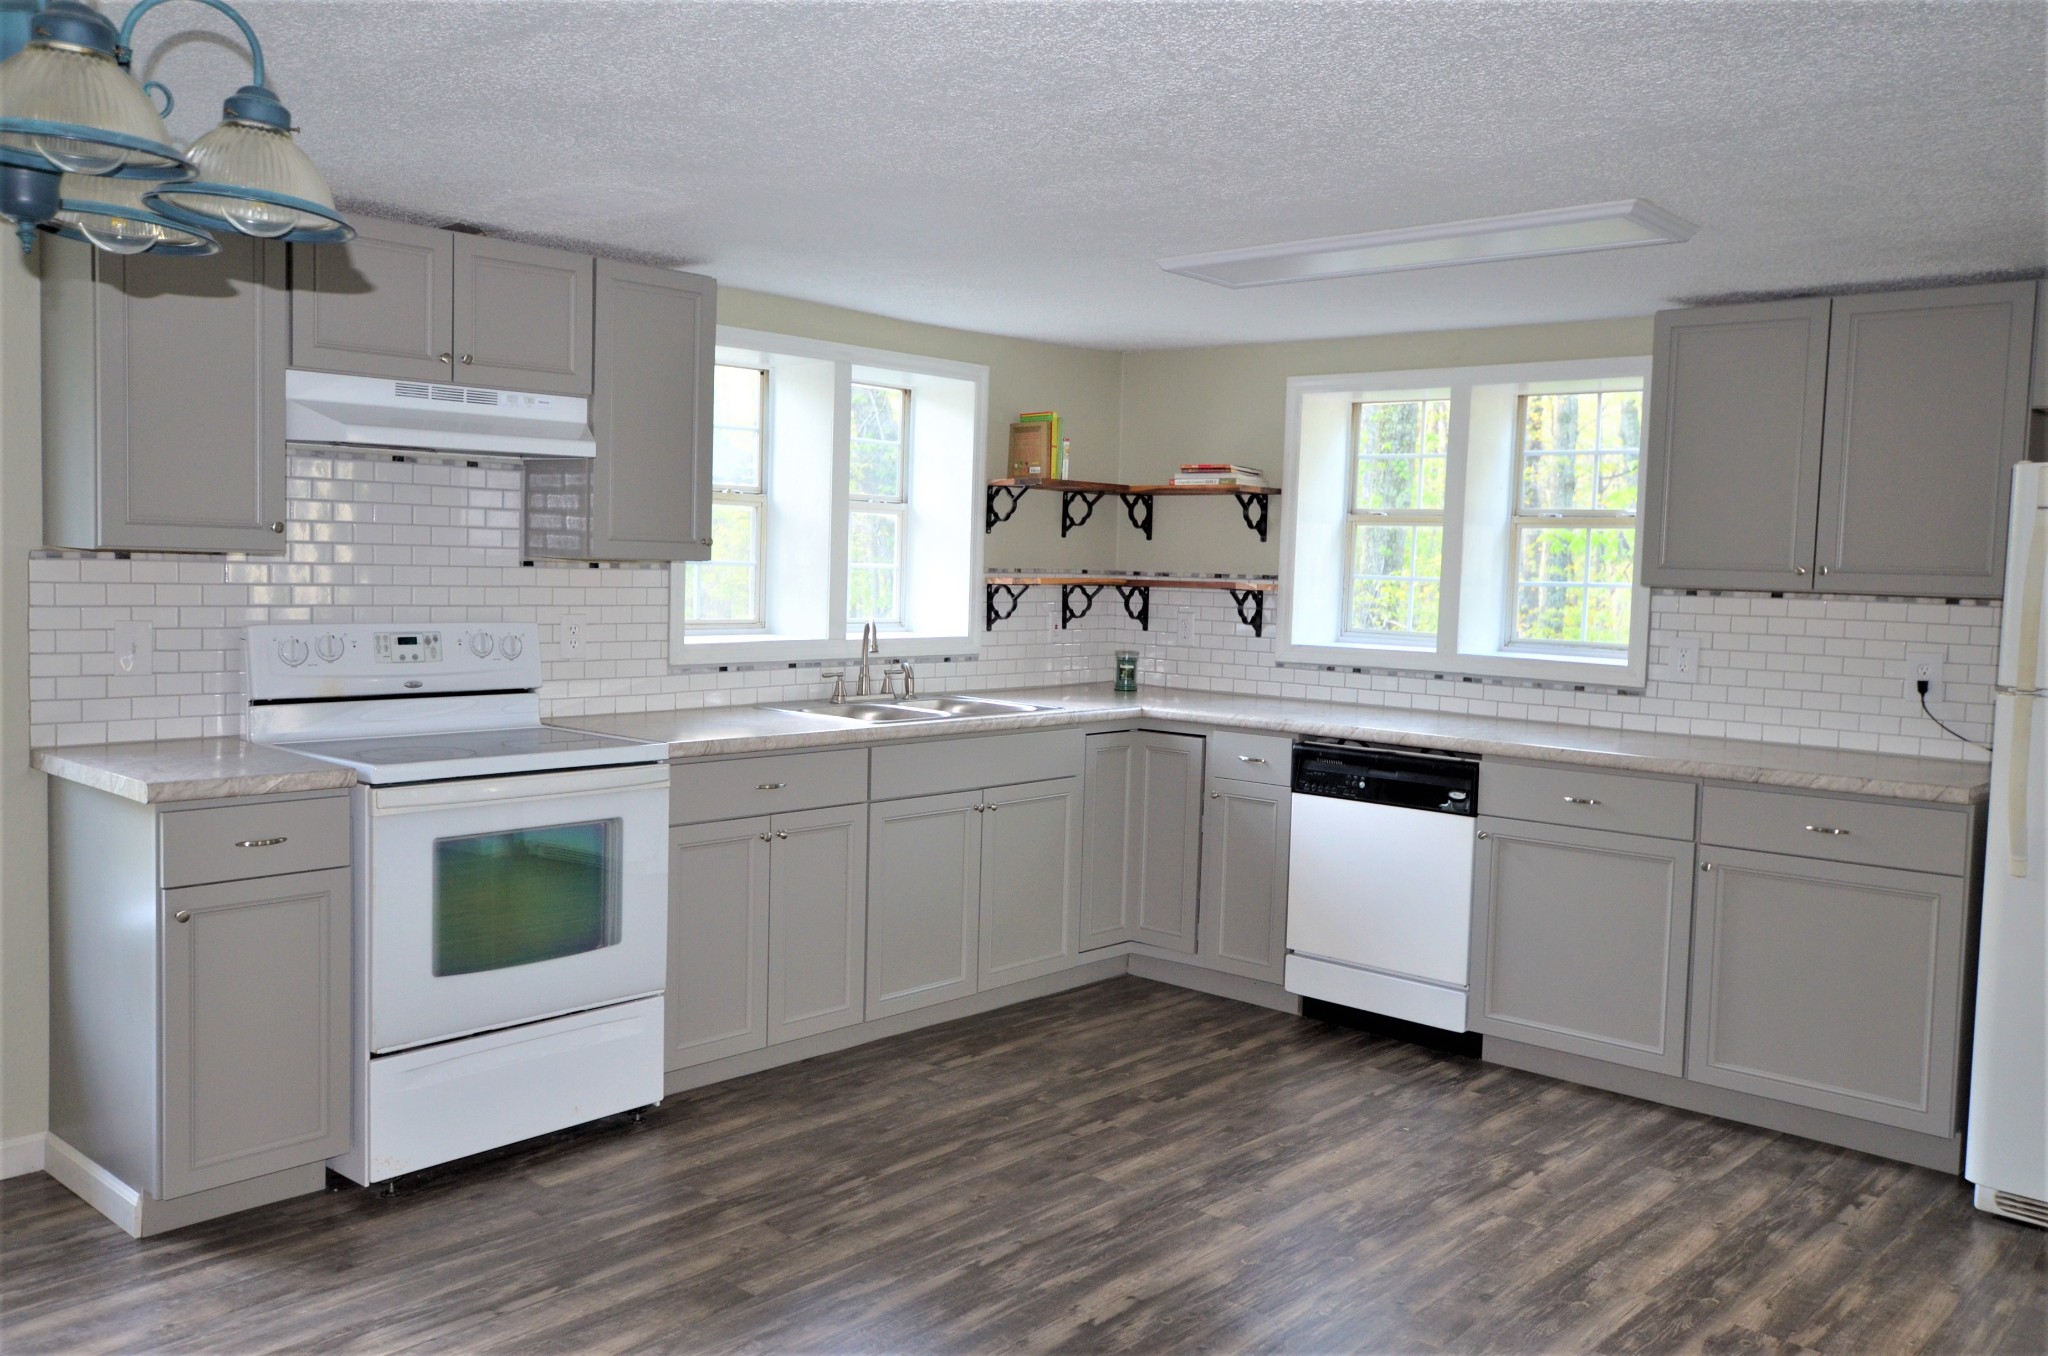 a kitchen with a sink cabinets wooden floor and view living room